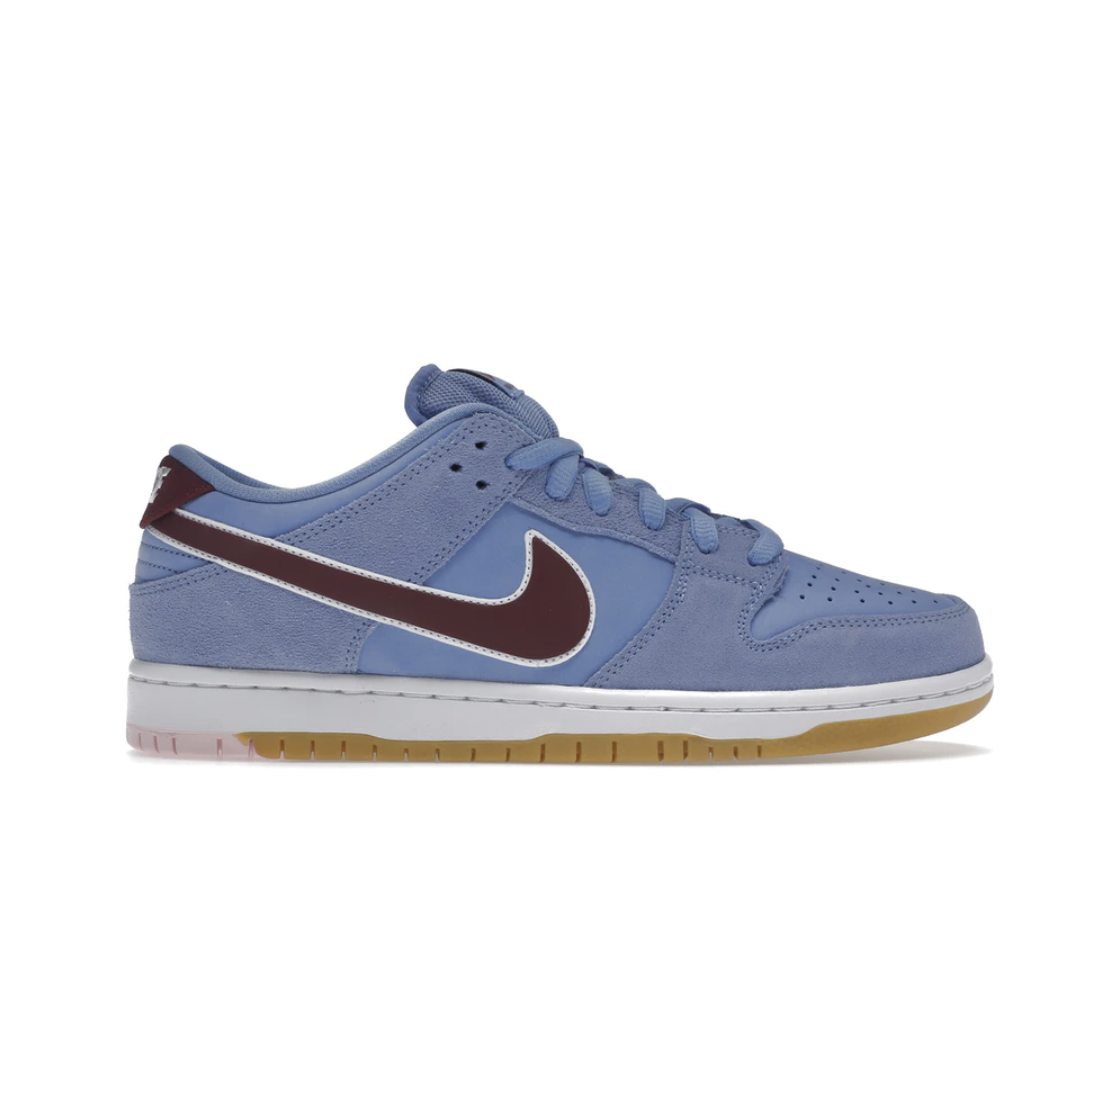 Nike SB Dunk Low Valour Blue Team Maroon from Nike